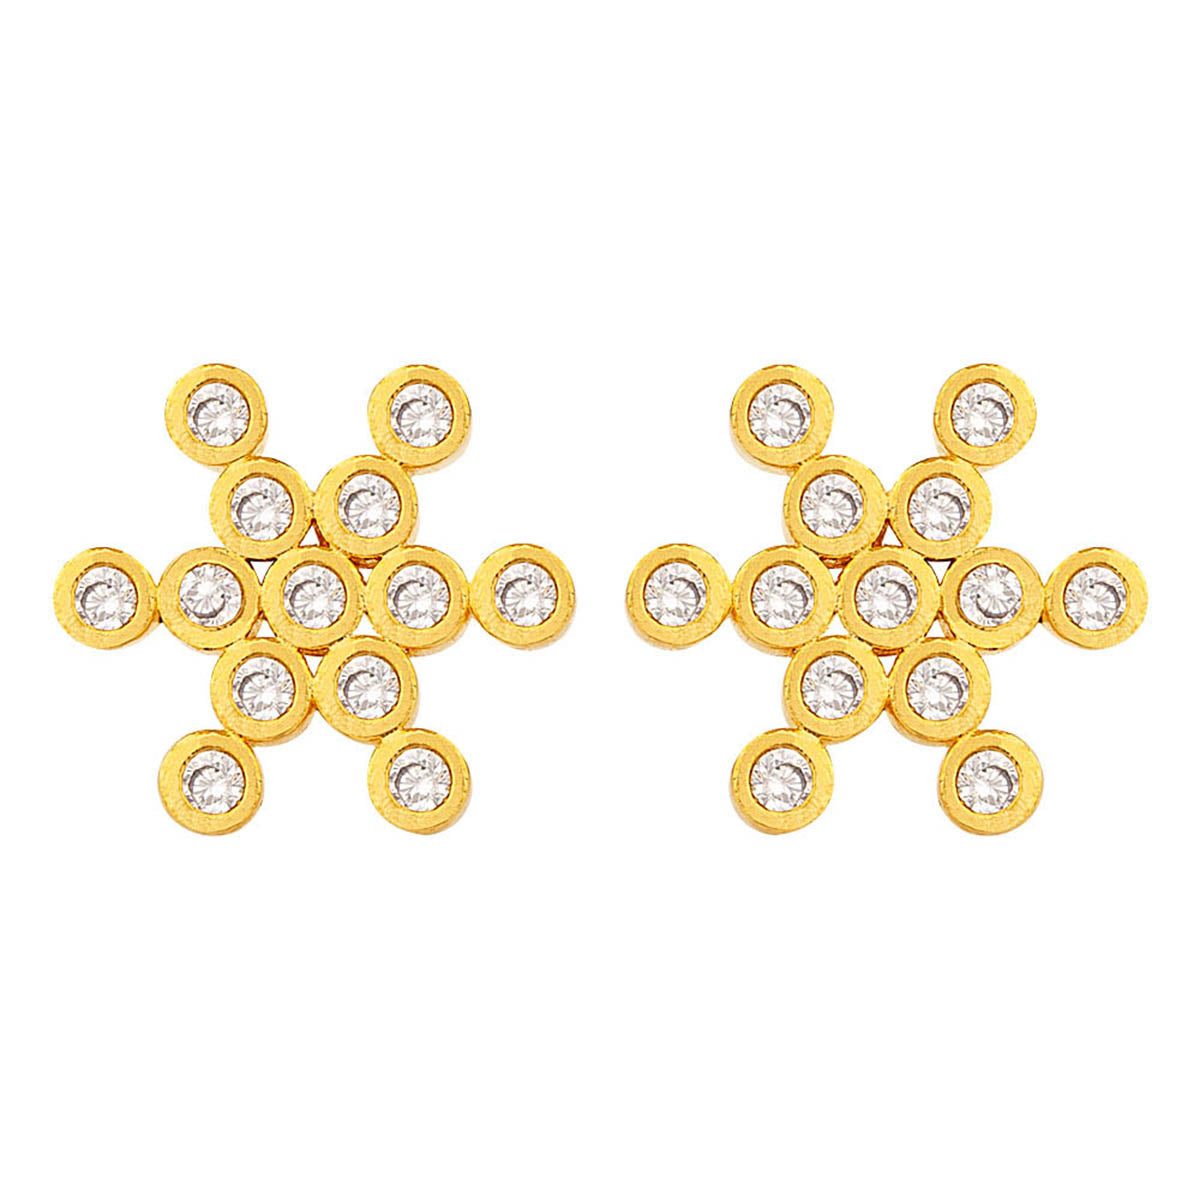 Floral Gold Plated Stud Earrings